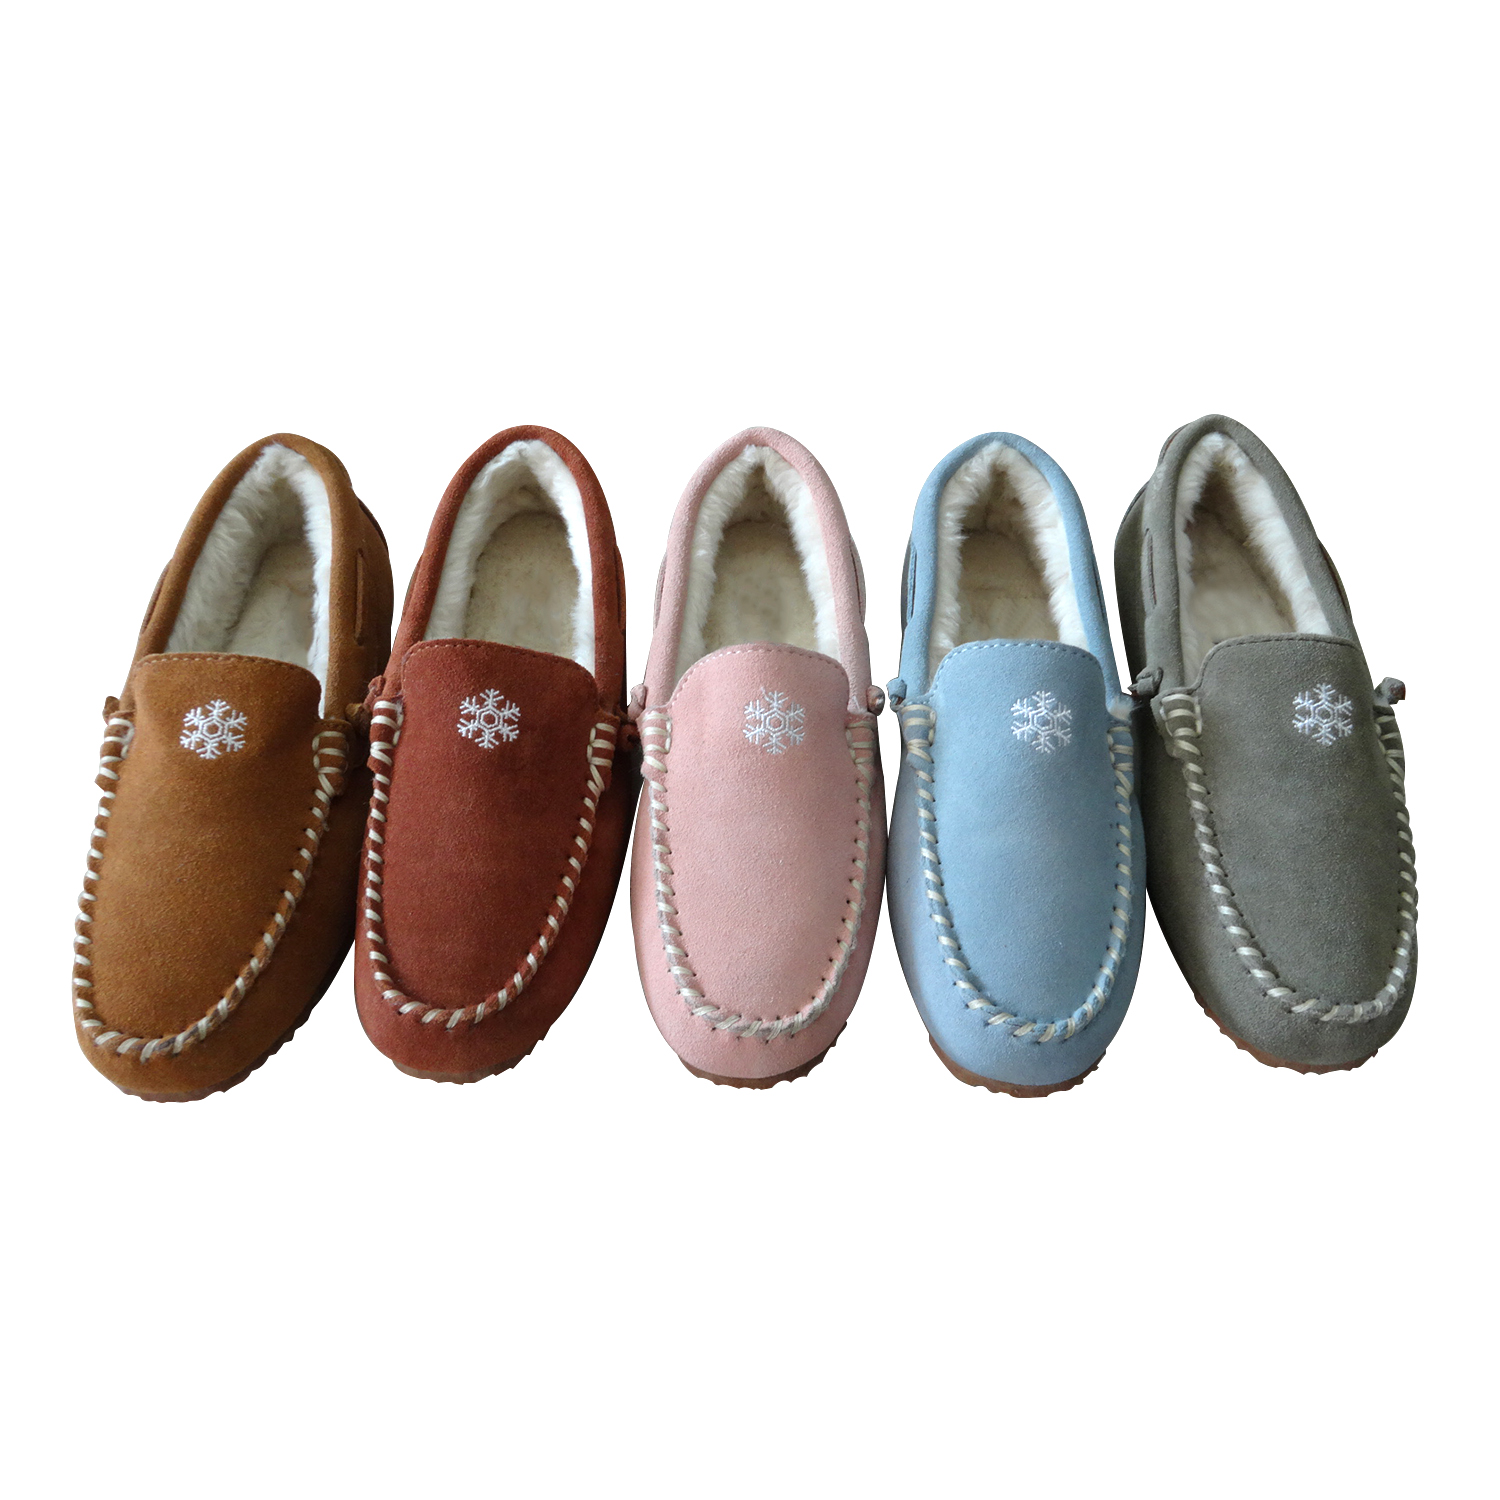 Women’s Warm Snow Embroidery Leather Moccasin Slippers Featured Image